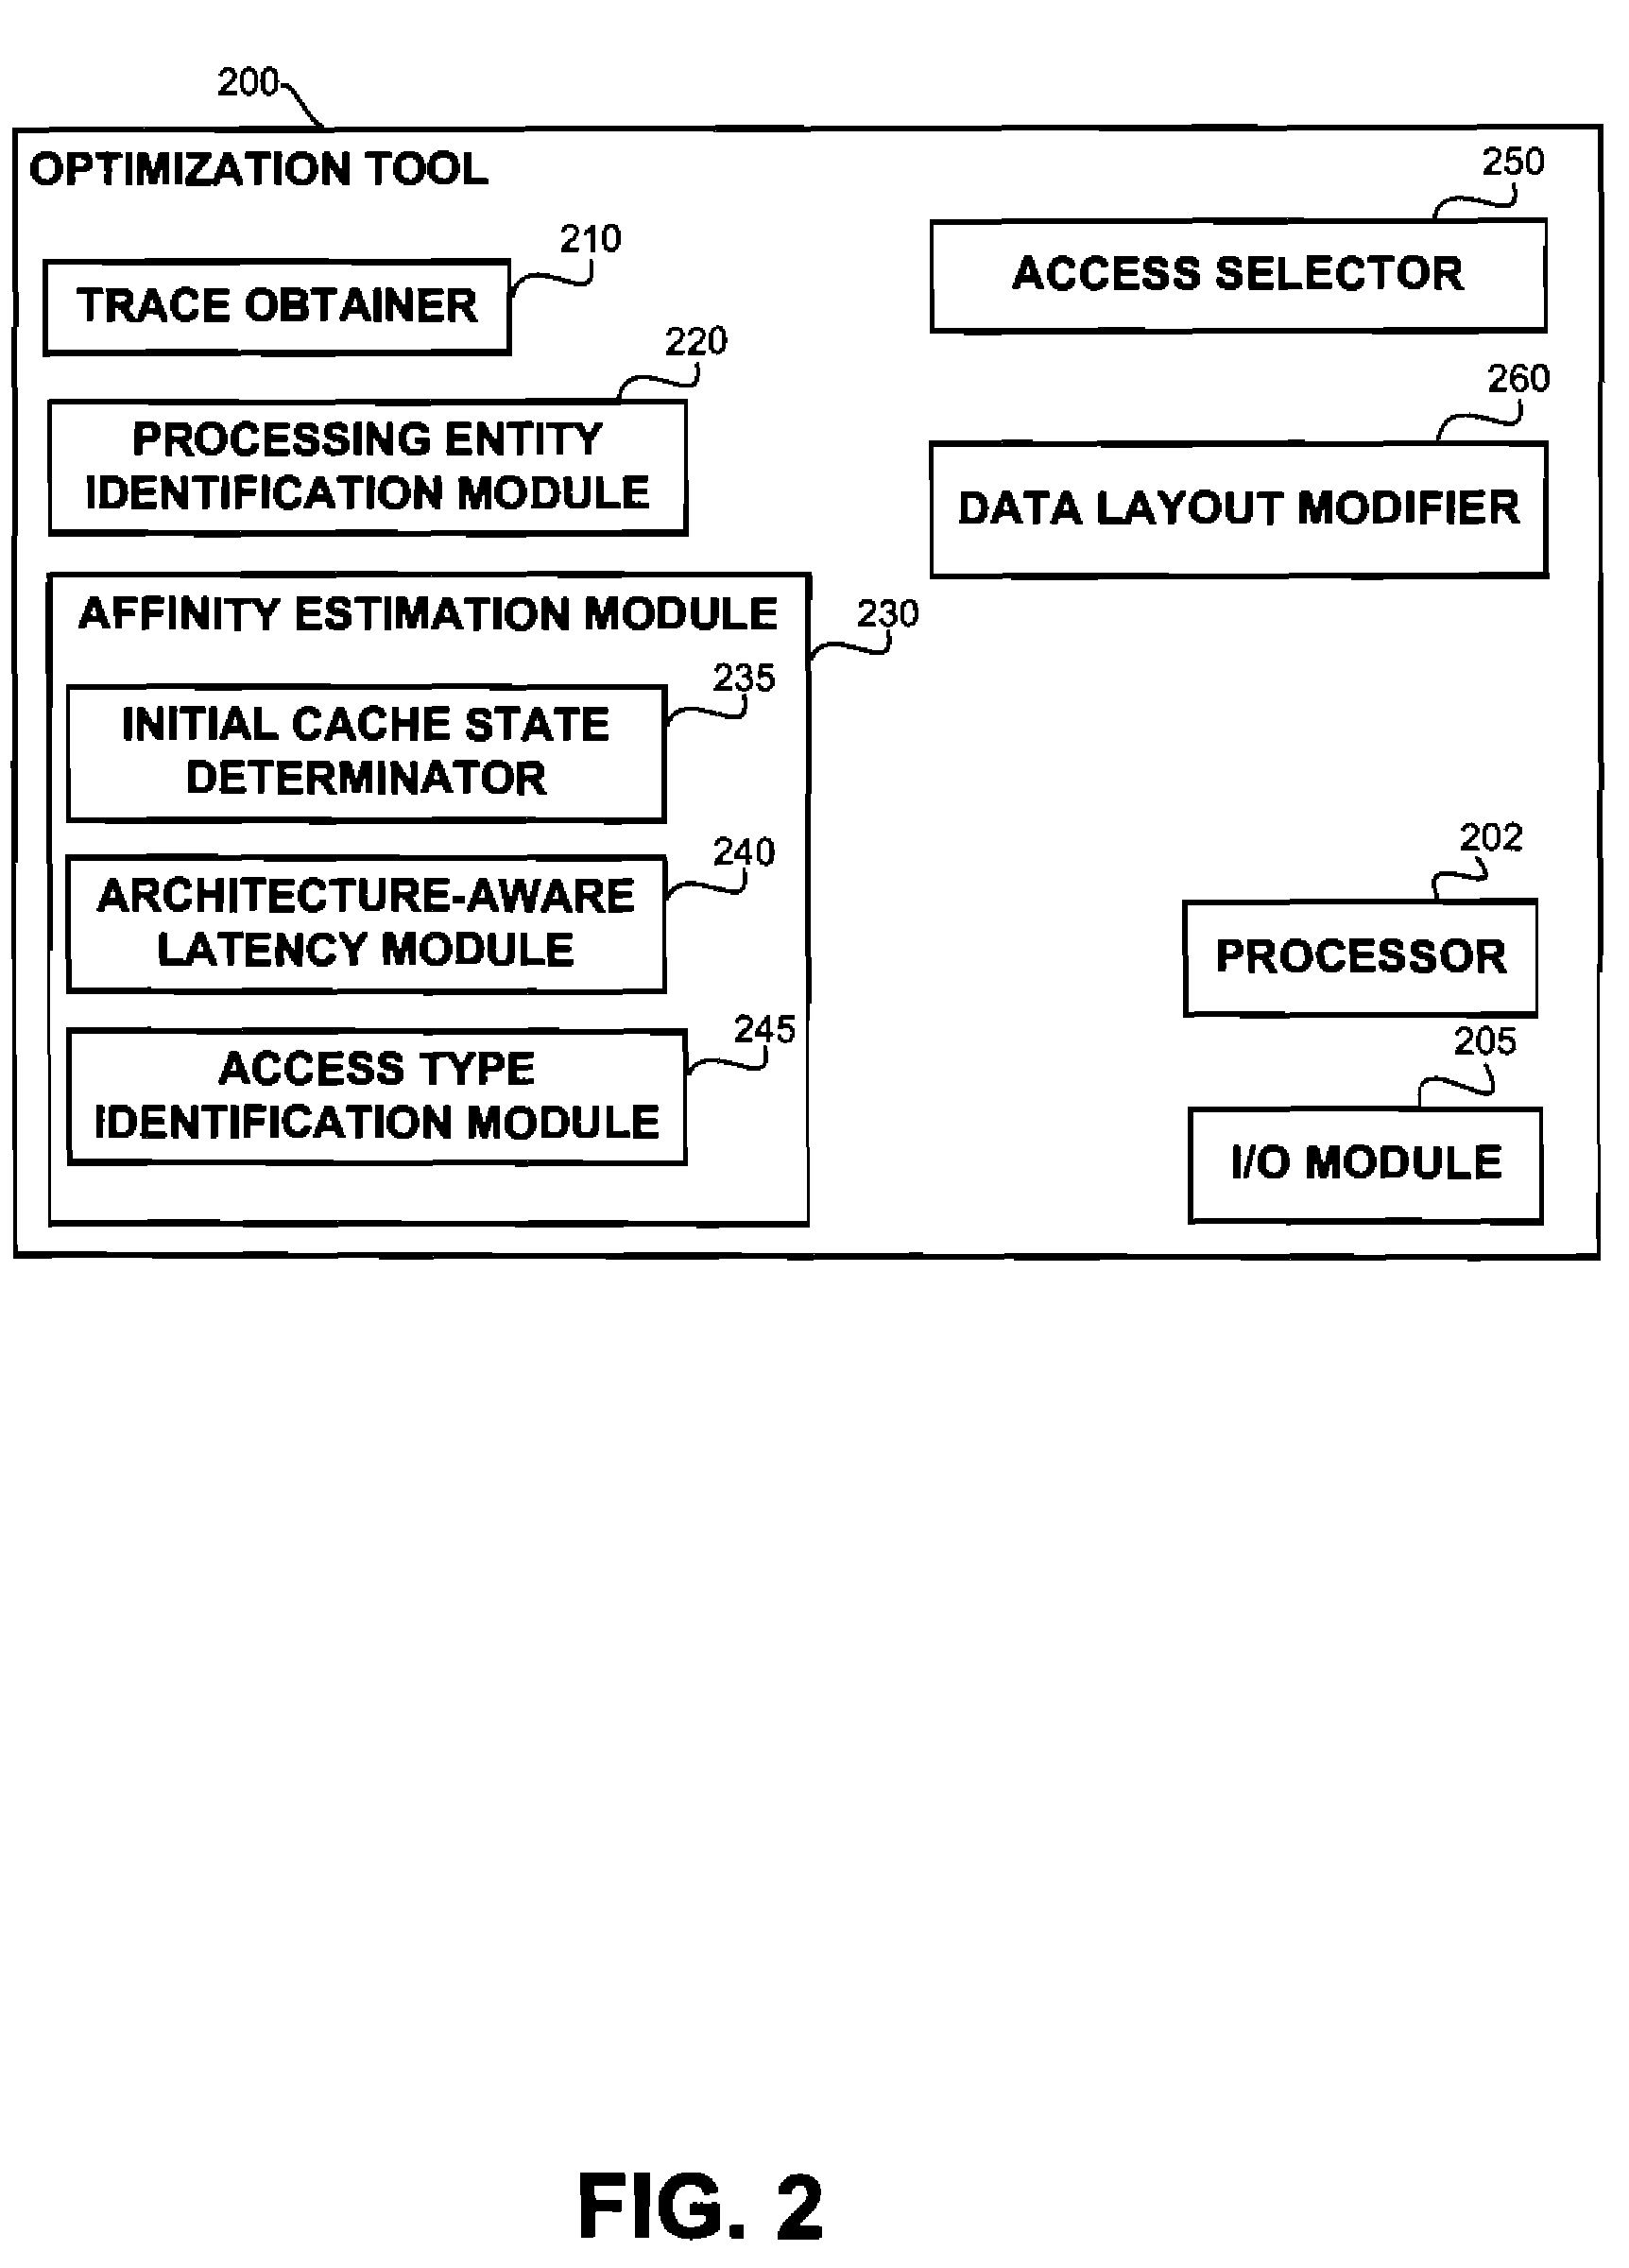 Architecture-aware field affinity estimation